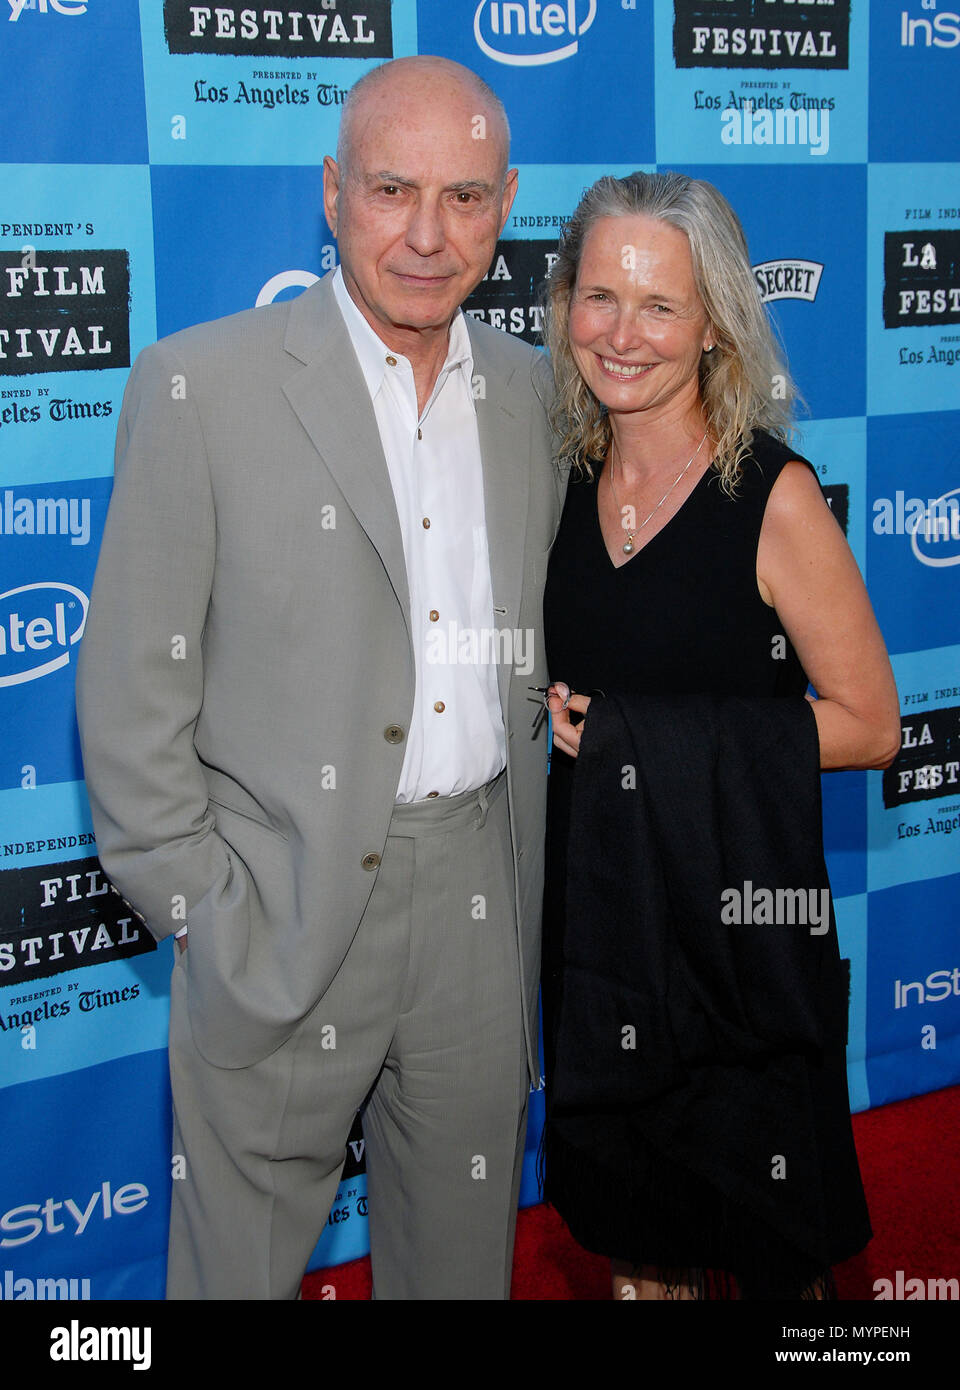 Alan Arkin and wife Suzanne arriving at the LITTLE MISS SUNSHINE at the Wadsworth Theater In Los Angeles. Sunday, July 2nd  2006.04 ArkinAlan Suzanne002  Event in Hollywood Life - California, Red Carpet Event, USA, Film Industry, Celebrities, Photography, Bestof, Arts Culture and Entertainment, Celebrities fashion, Best of, Hollywood Life, Event in Hollywood Life - California, Red Carpet and backstage, Music celebrities, Topix, Couple, family ( husband and wife ) and kids- Children, brothers and sisters inquiry tsuni@Gamma-USA.com, Credit Tsuni / USA, 2006 to 2009 Stock Photo